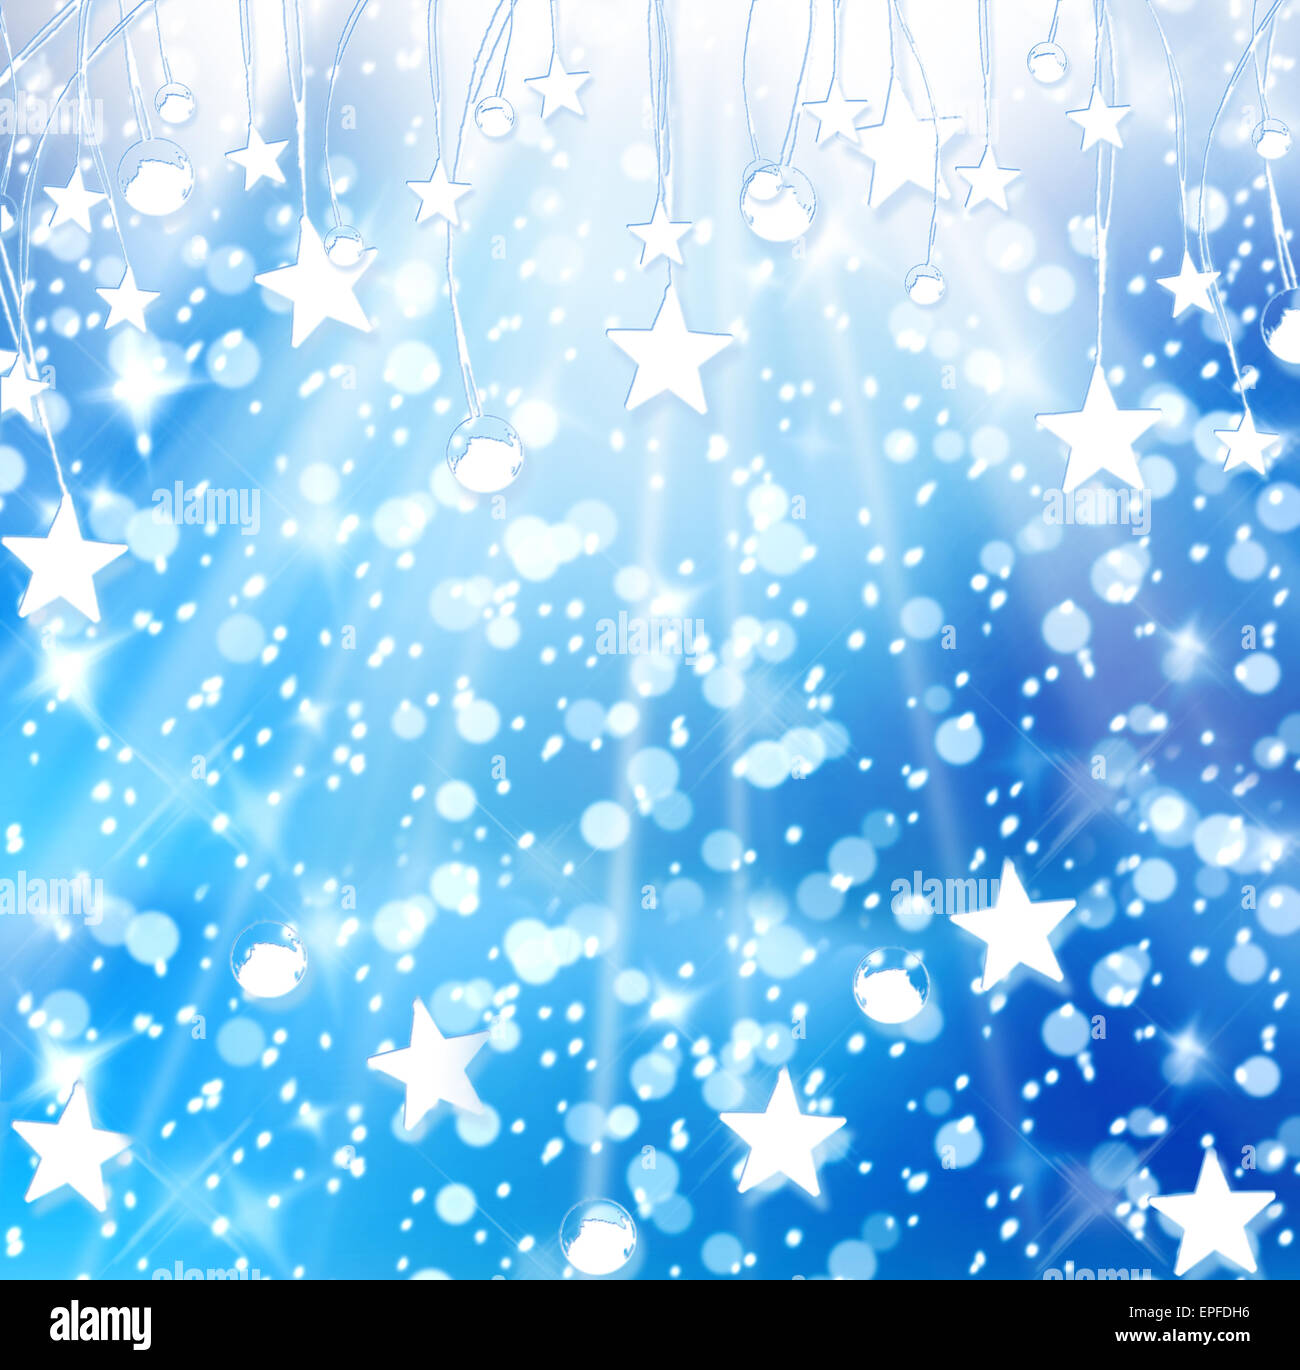 Christmas snowy background with blue and white stars Stock Photo